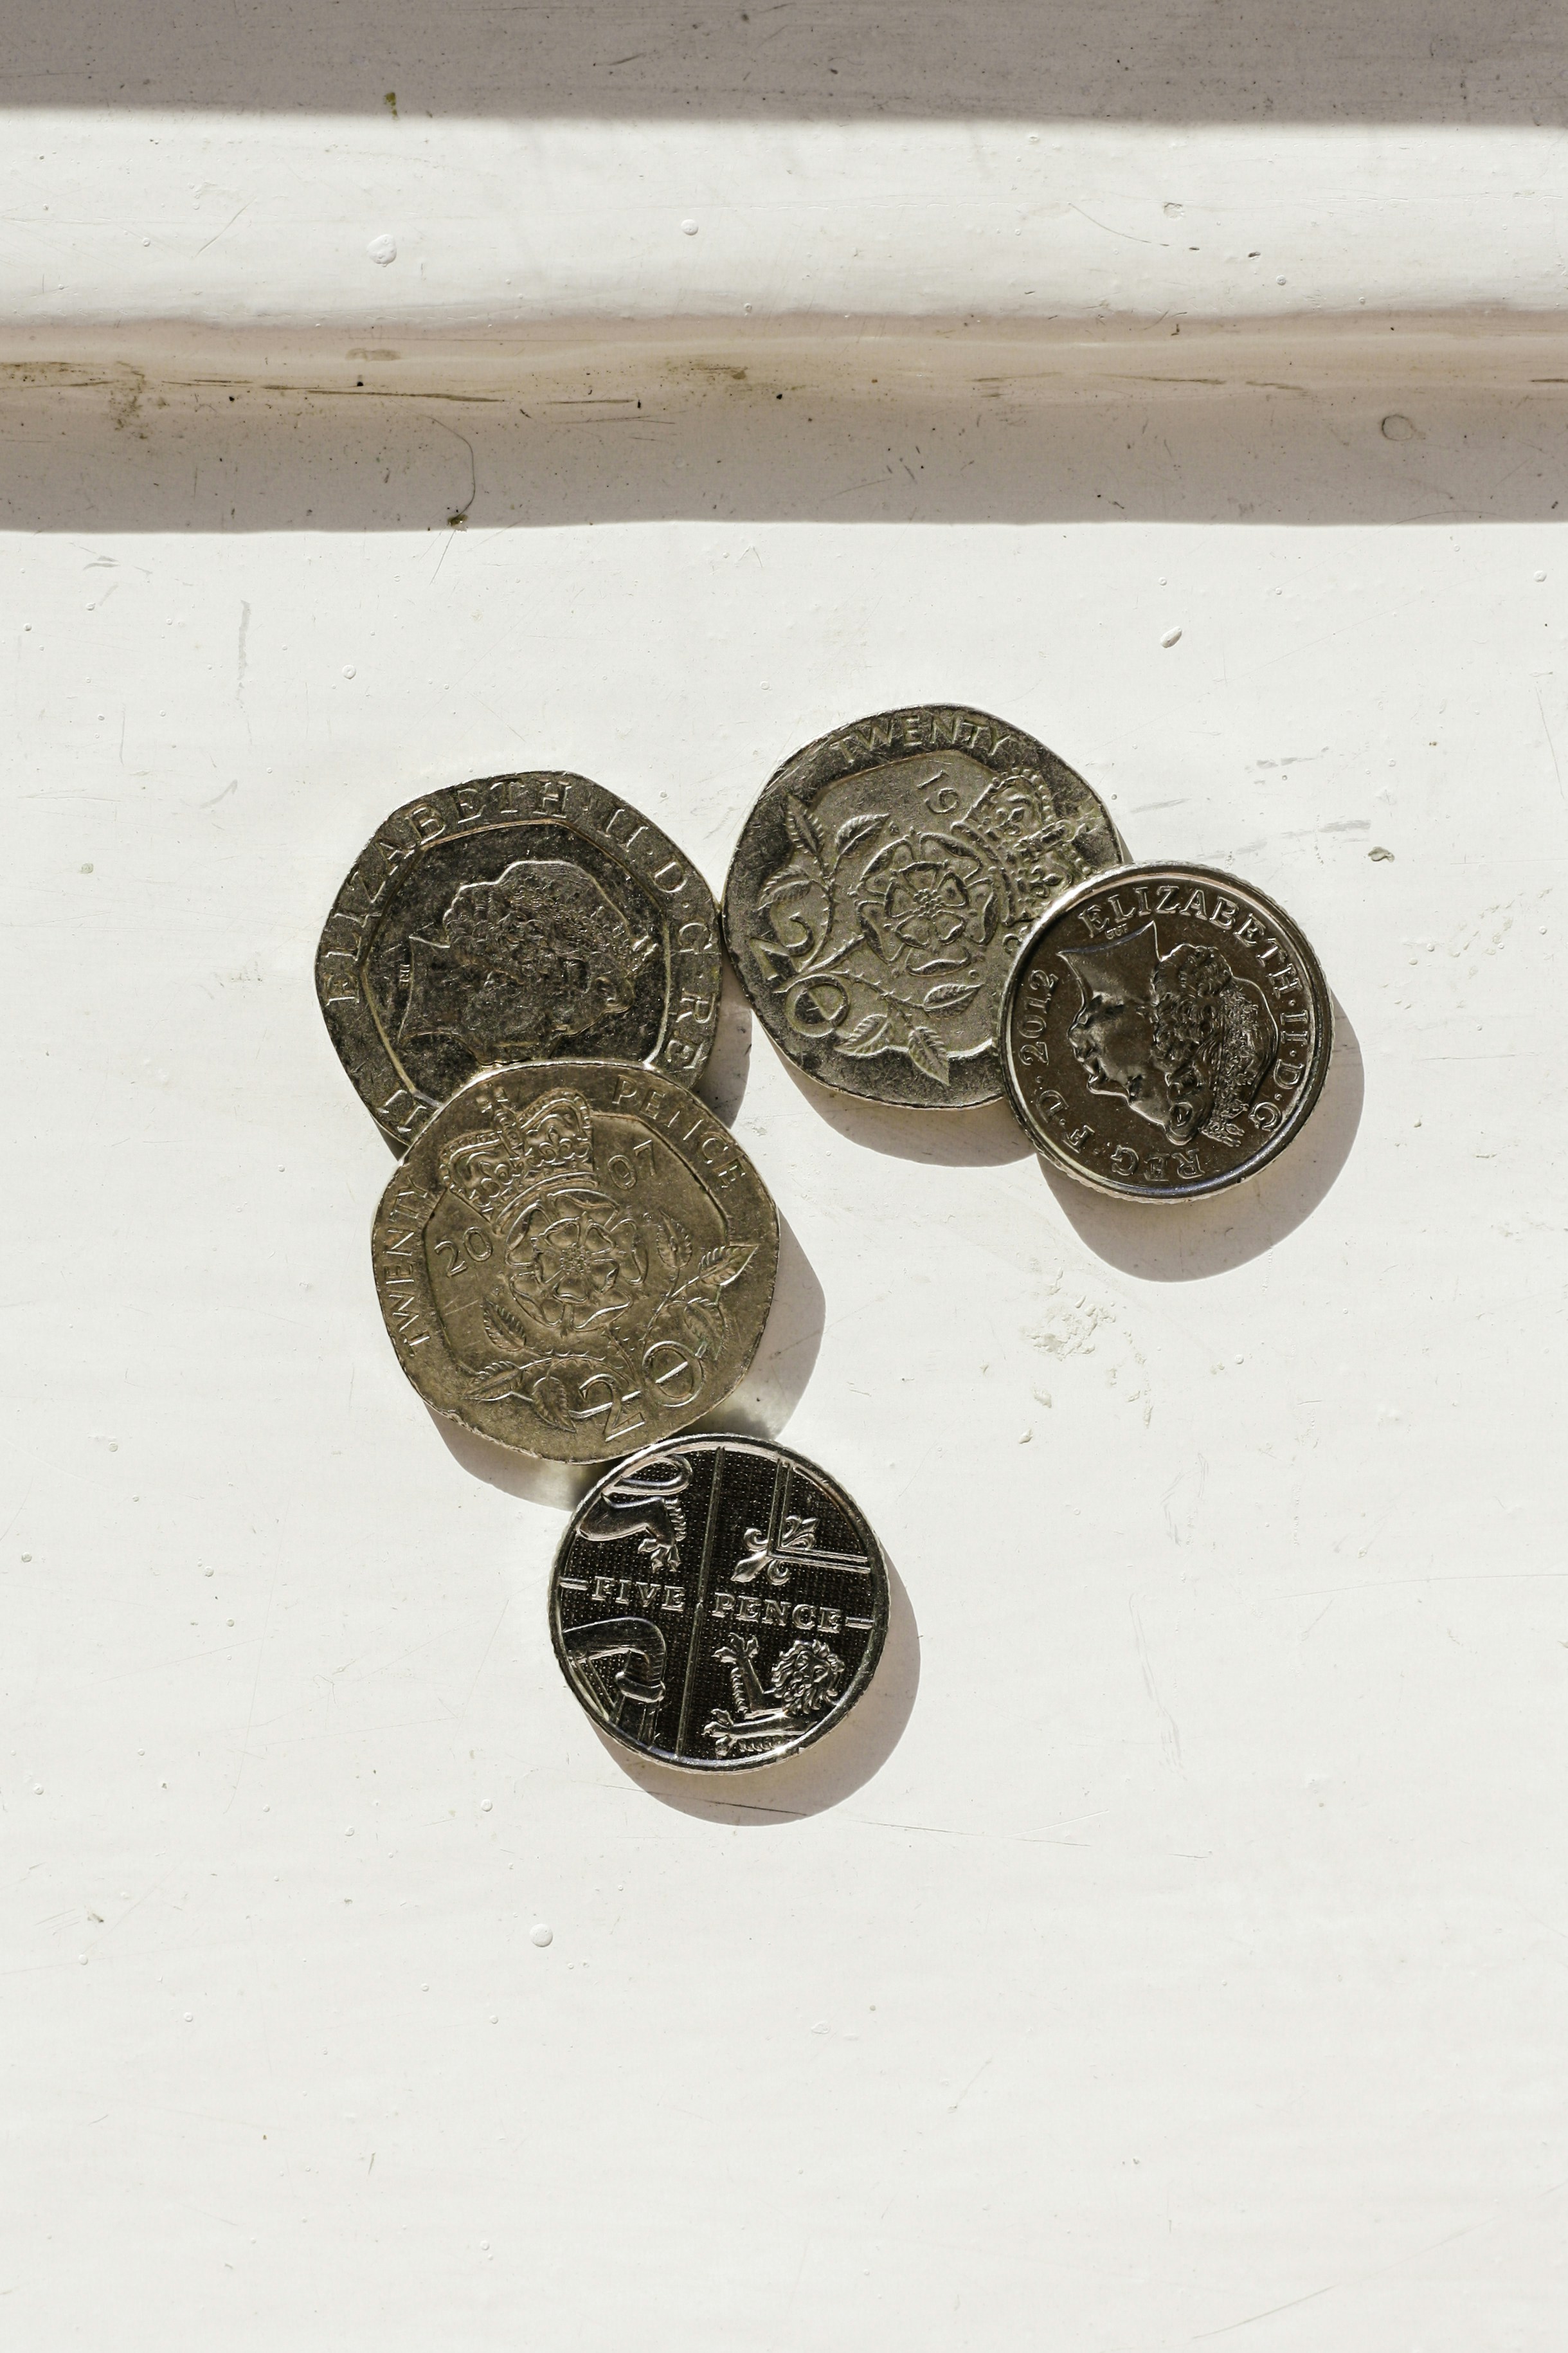 Seventy pence in twenty pence and five pence pieces in British money